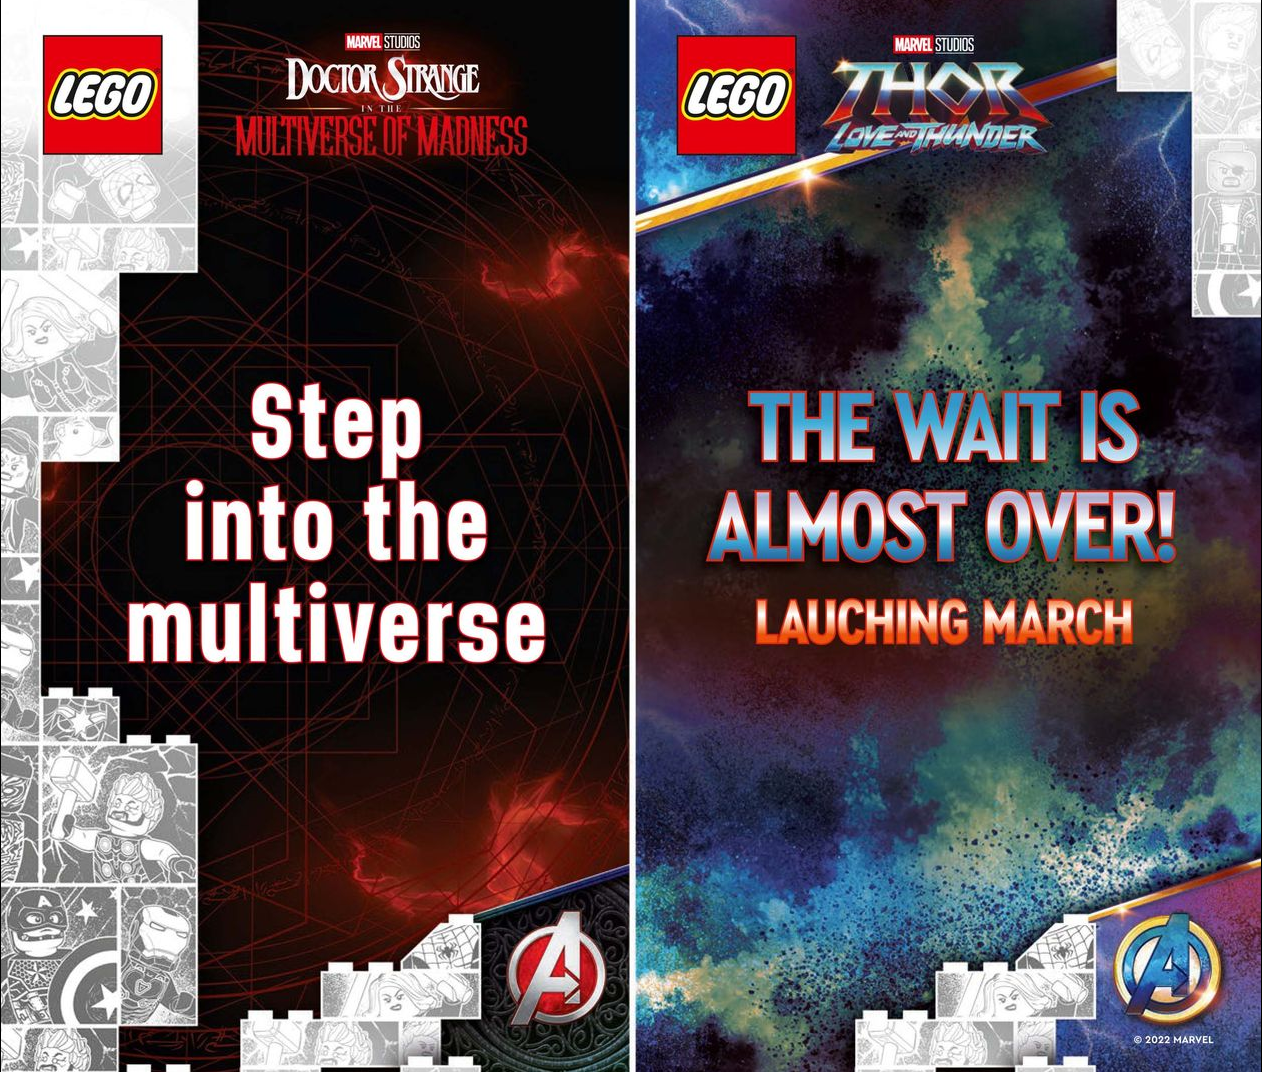 Lego Calendar July 2022 Lego Thor Love And Thunder Sets Coming March 2022! - Jay's Brick Blog